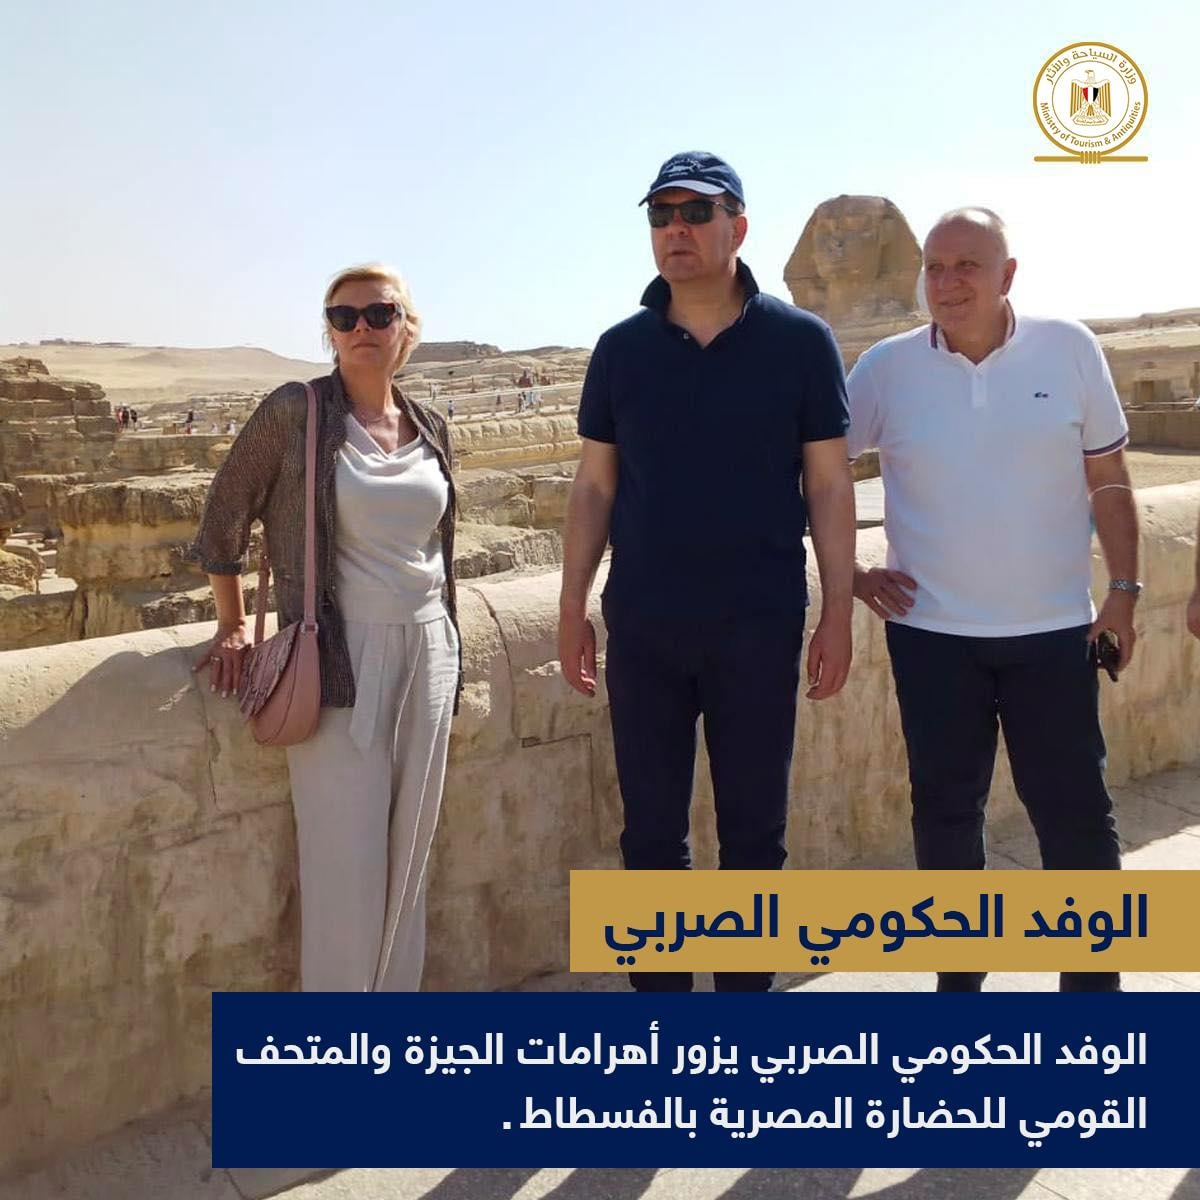 During the visit to the Giza Pyramids and Sphinx - Min. of Tourism & Antiquities